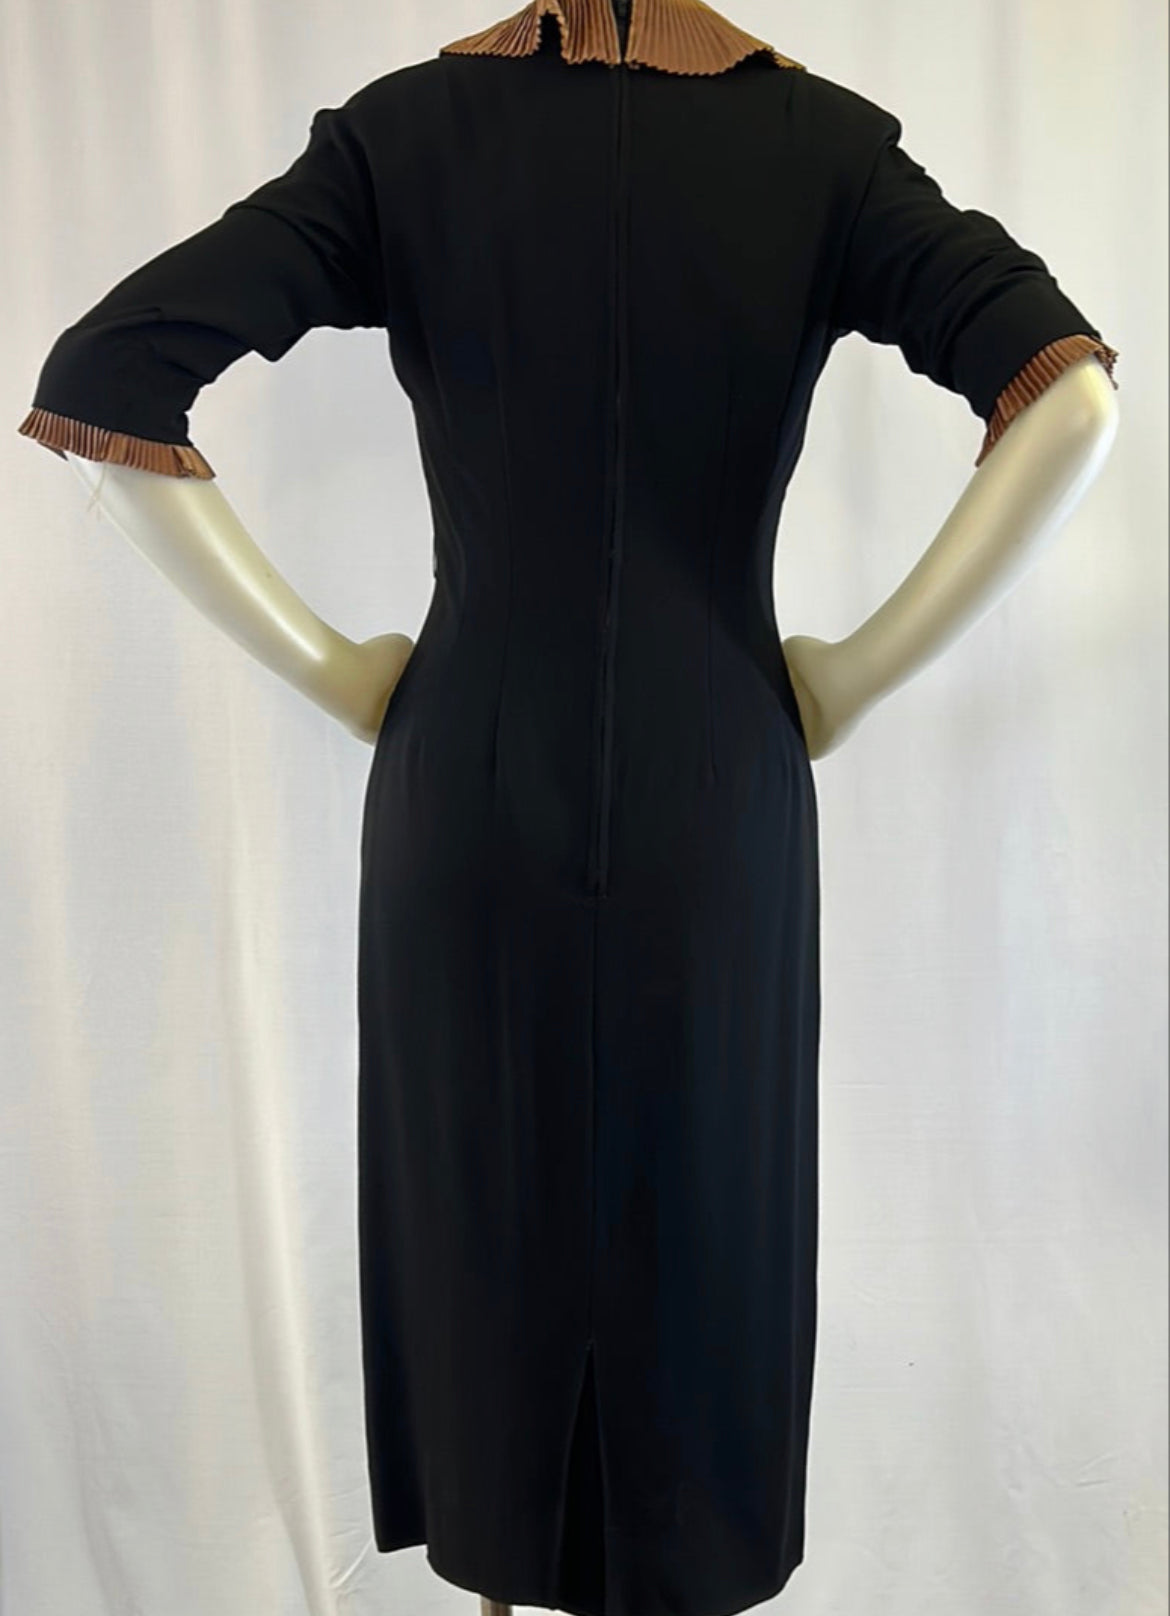 Black Crepe Dress With Copper Ruffled Collar & Cuffs